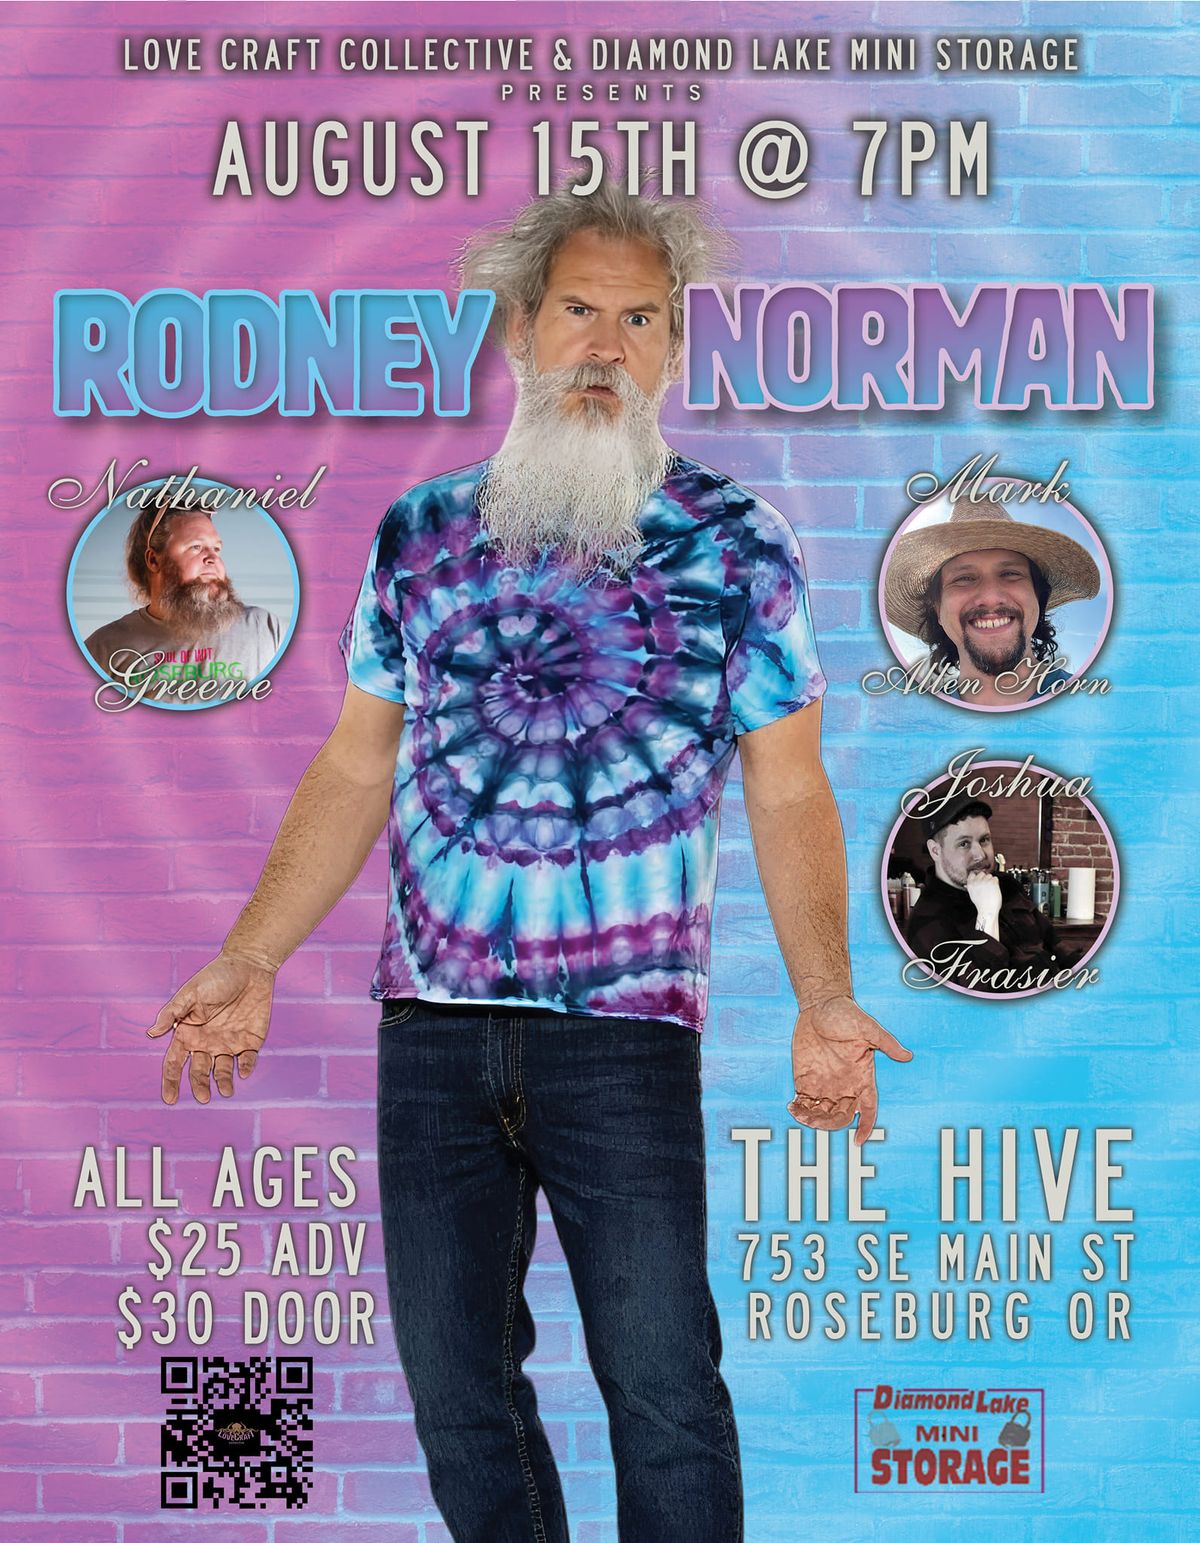 LCC Presents: Rodney Norman @ The Hive! 